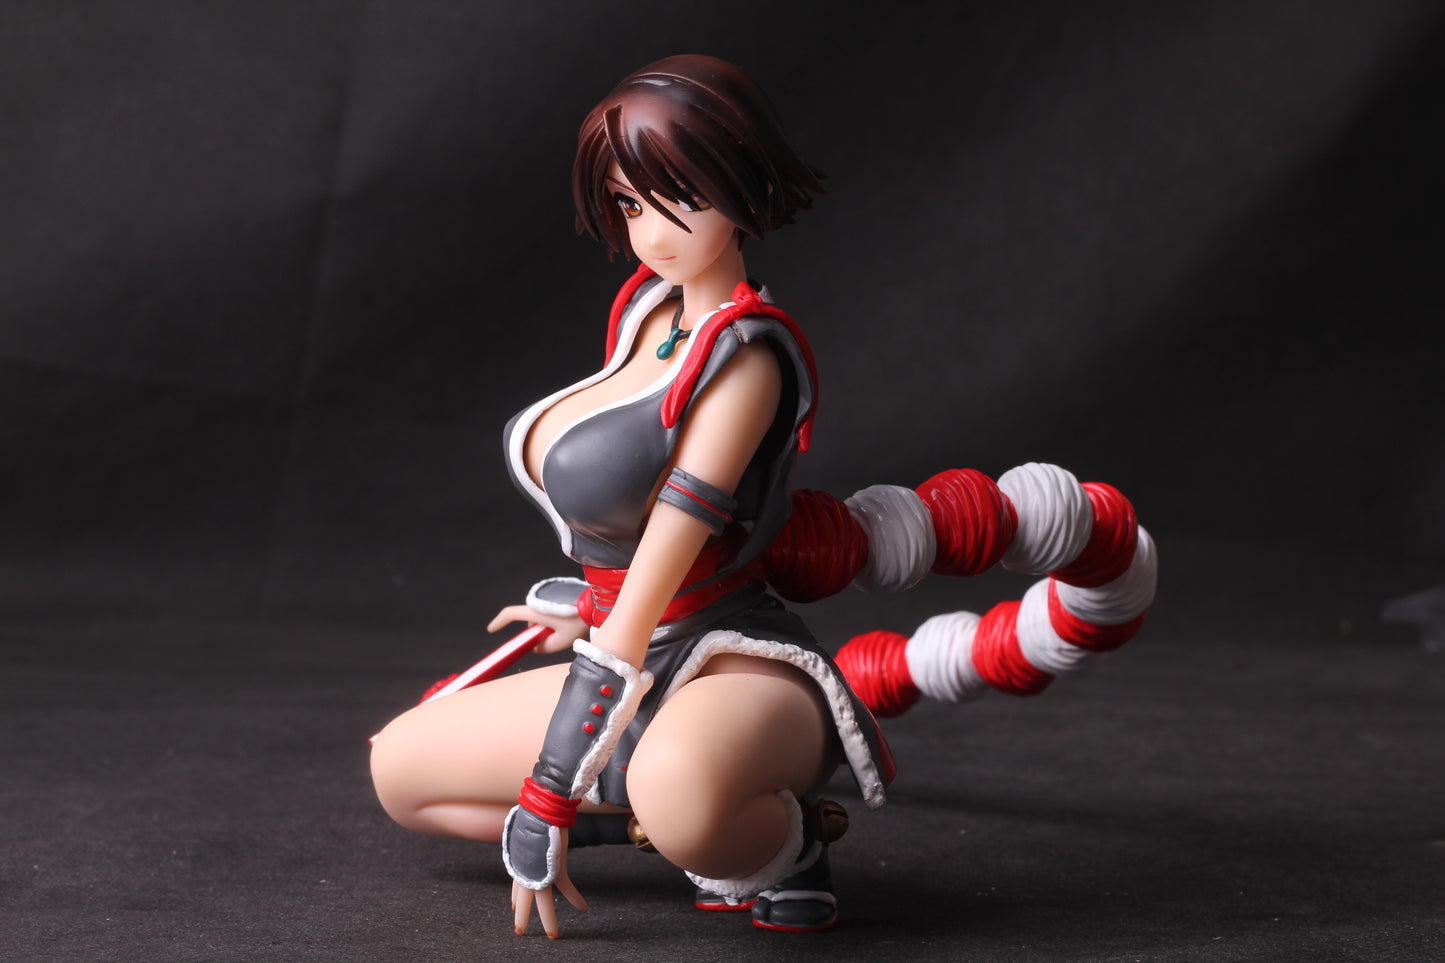 Japanese anime High School DxD sexy Rias Gremory naked anime figure resin figure girl